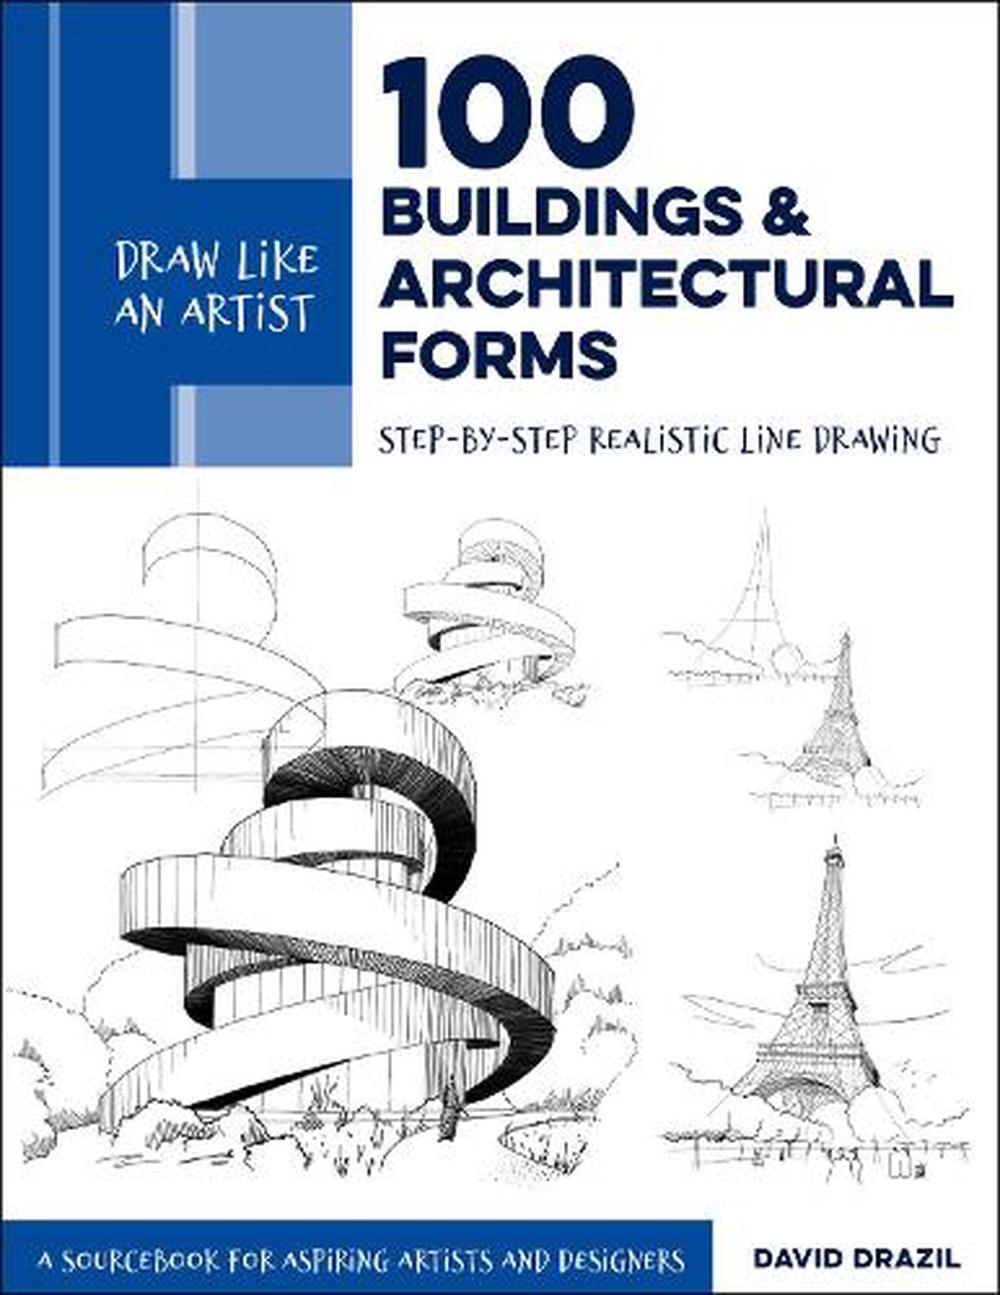 Artist:　by　at　Architectural　and　Paperback,　Like　100　Drazil,　Draw　Nile　online　Buildings　David　an　Buy　The　Forms　9780760370766